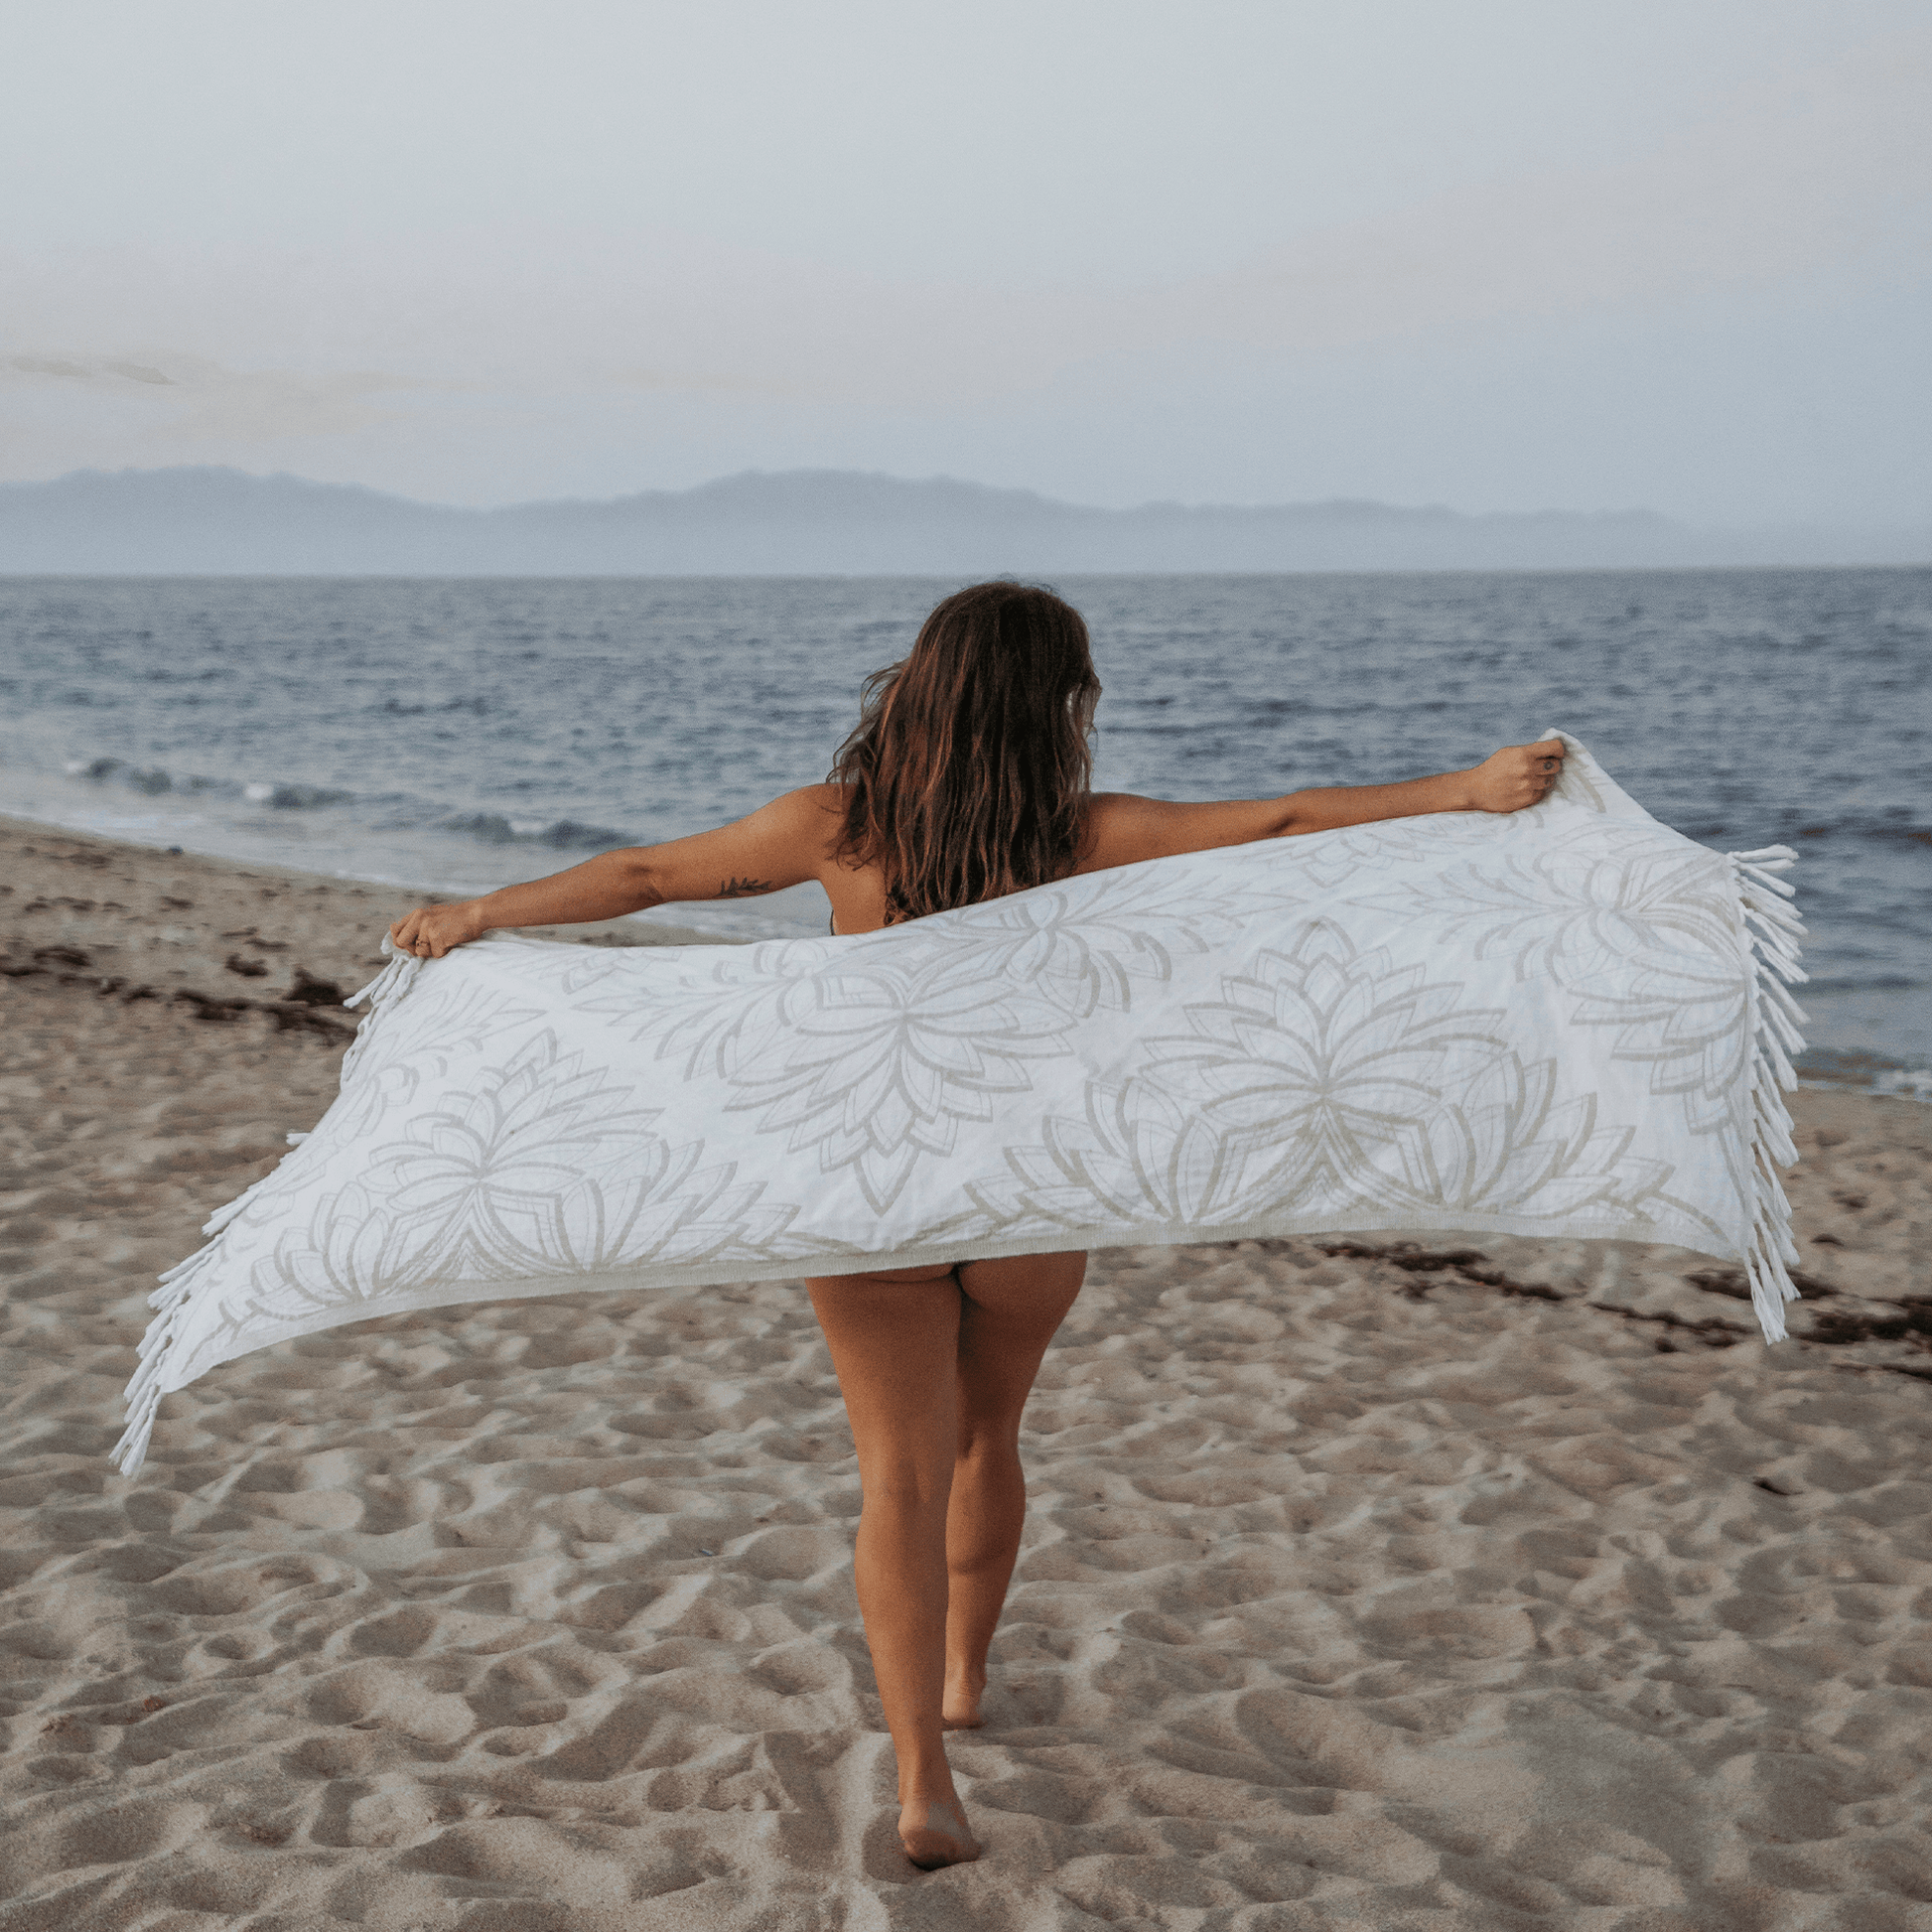 Woman at the beach with a Turkish towel